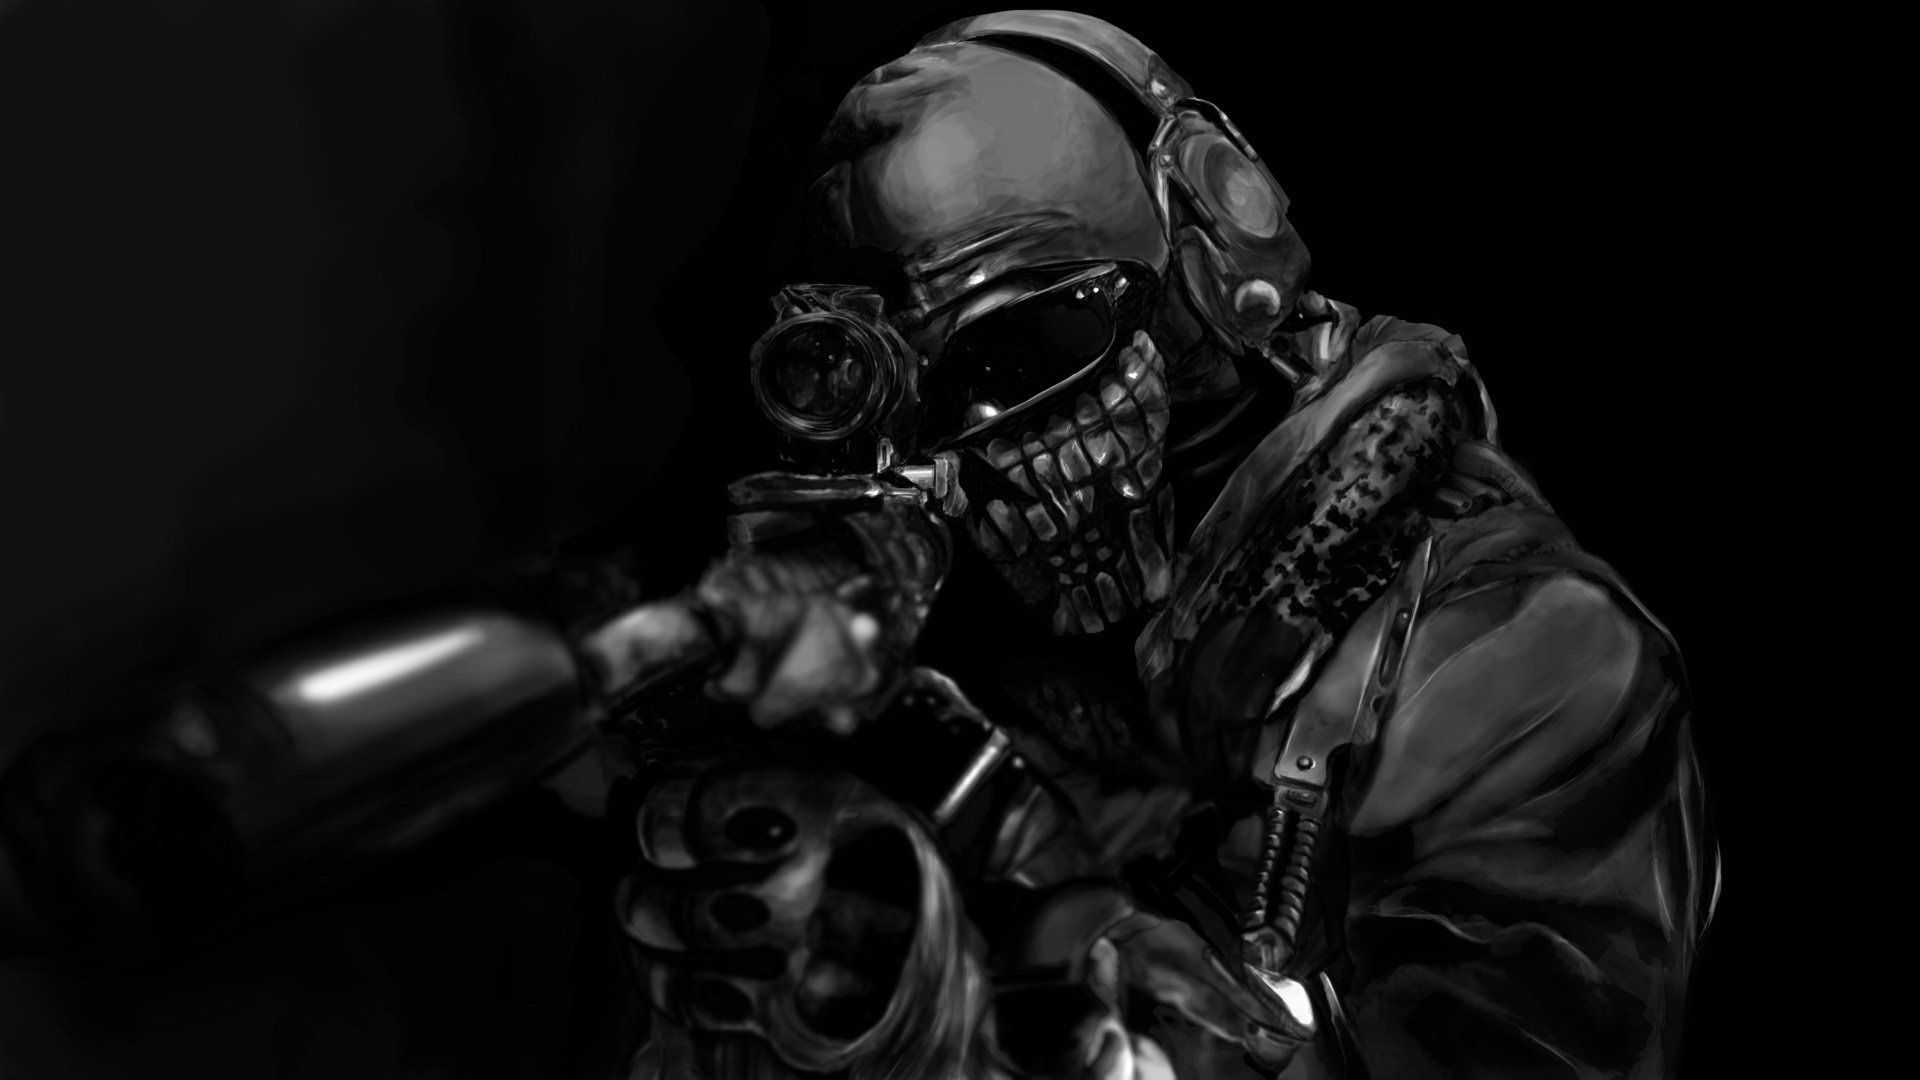 Call Of Duty Ghost wallpapers